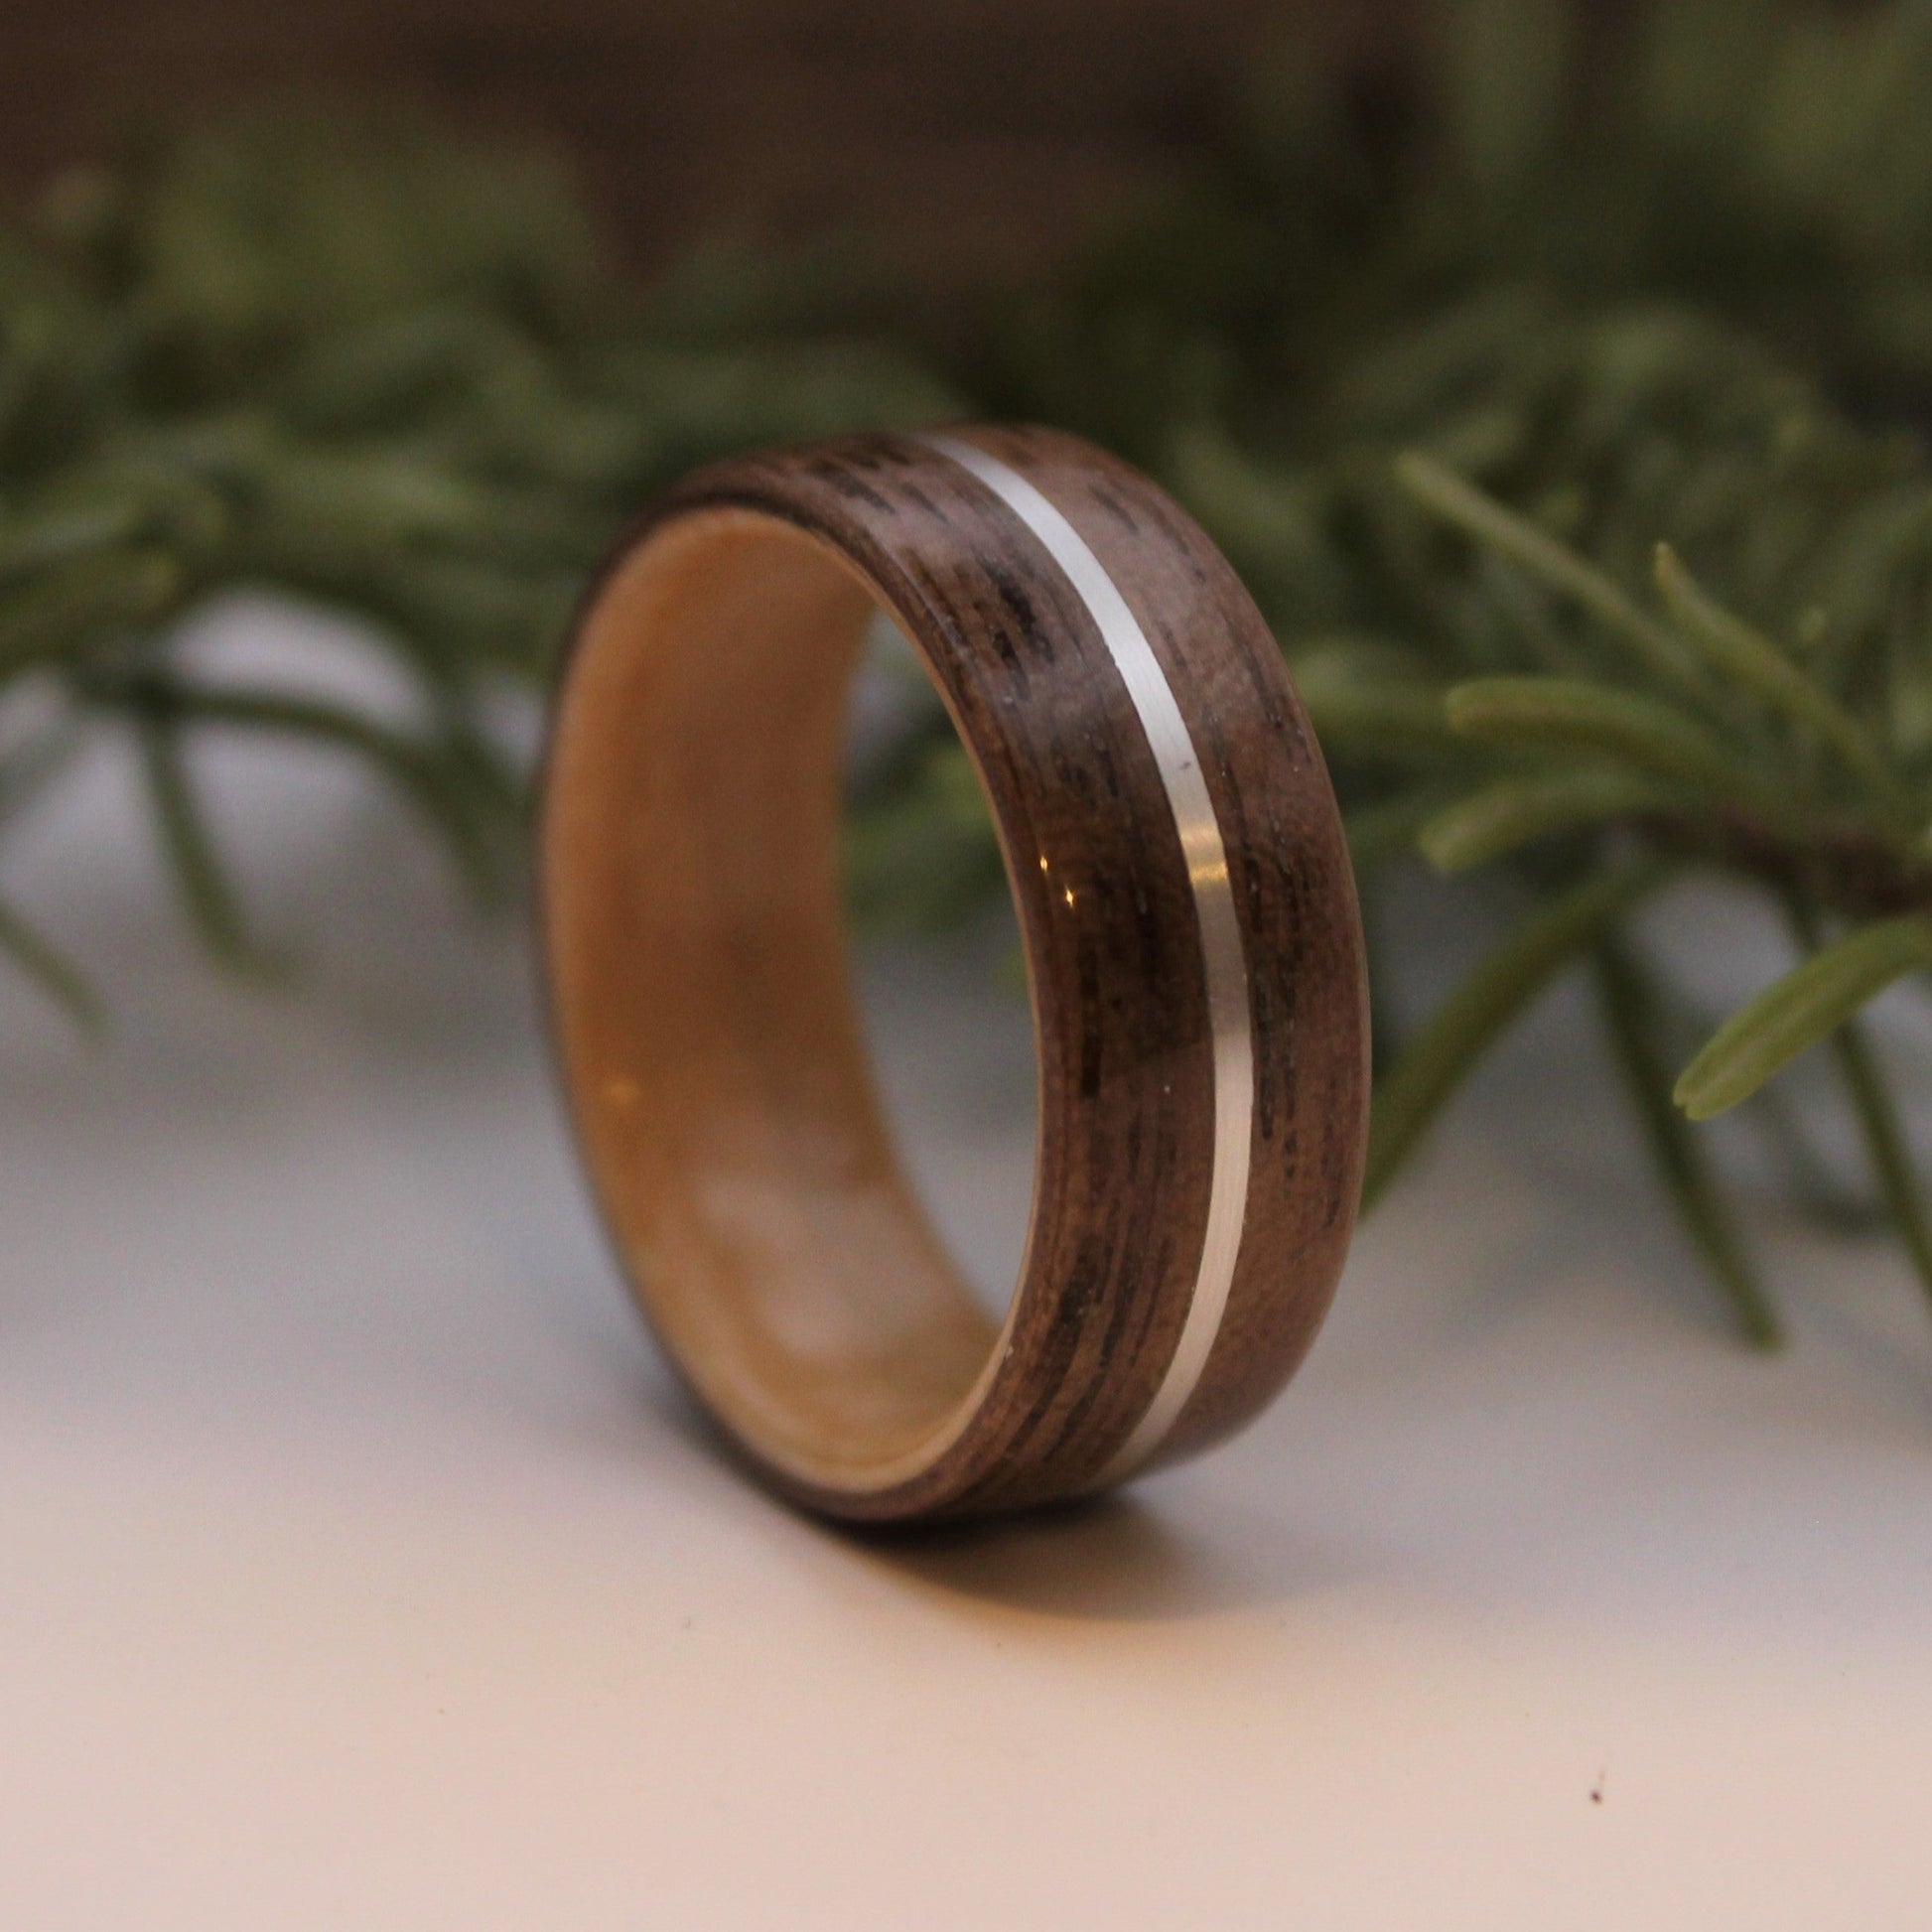 Walnut wood ring with silver inlay